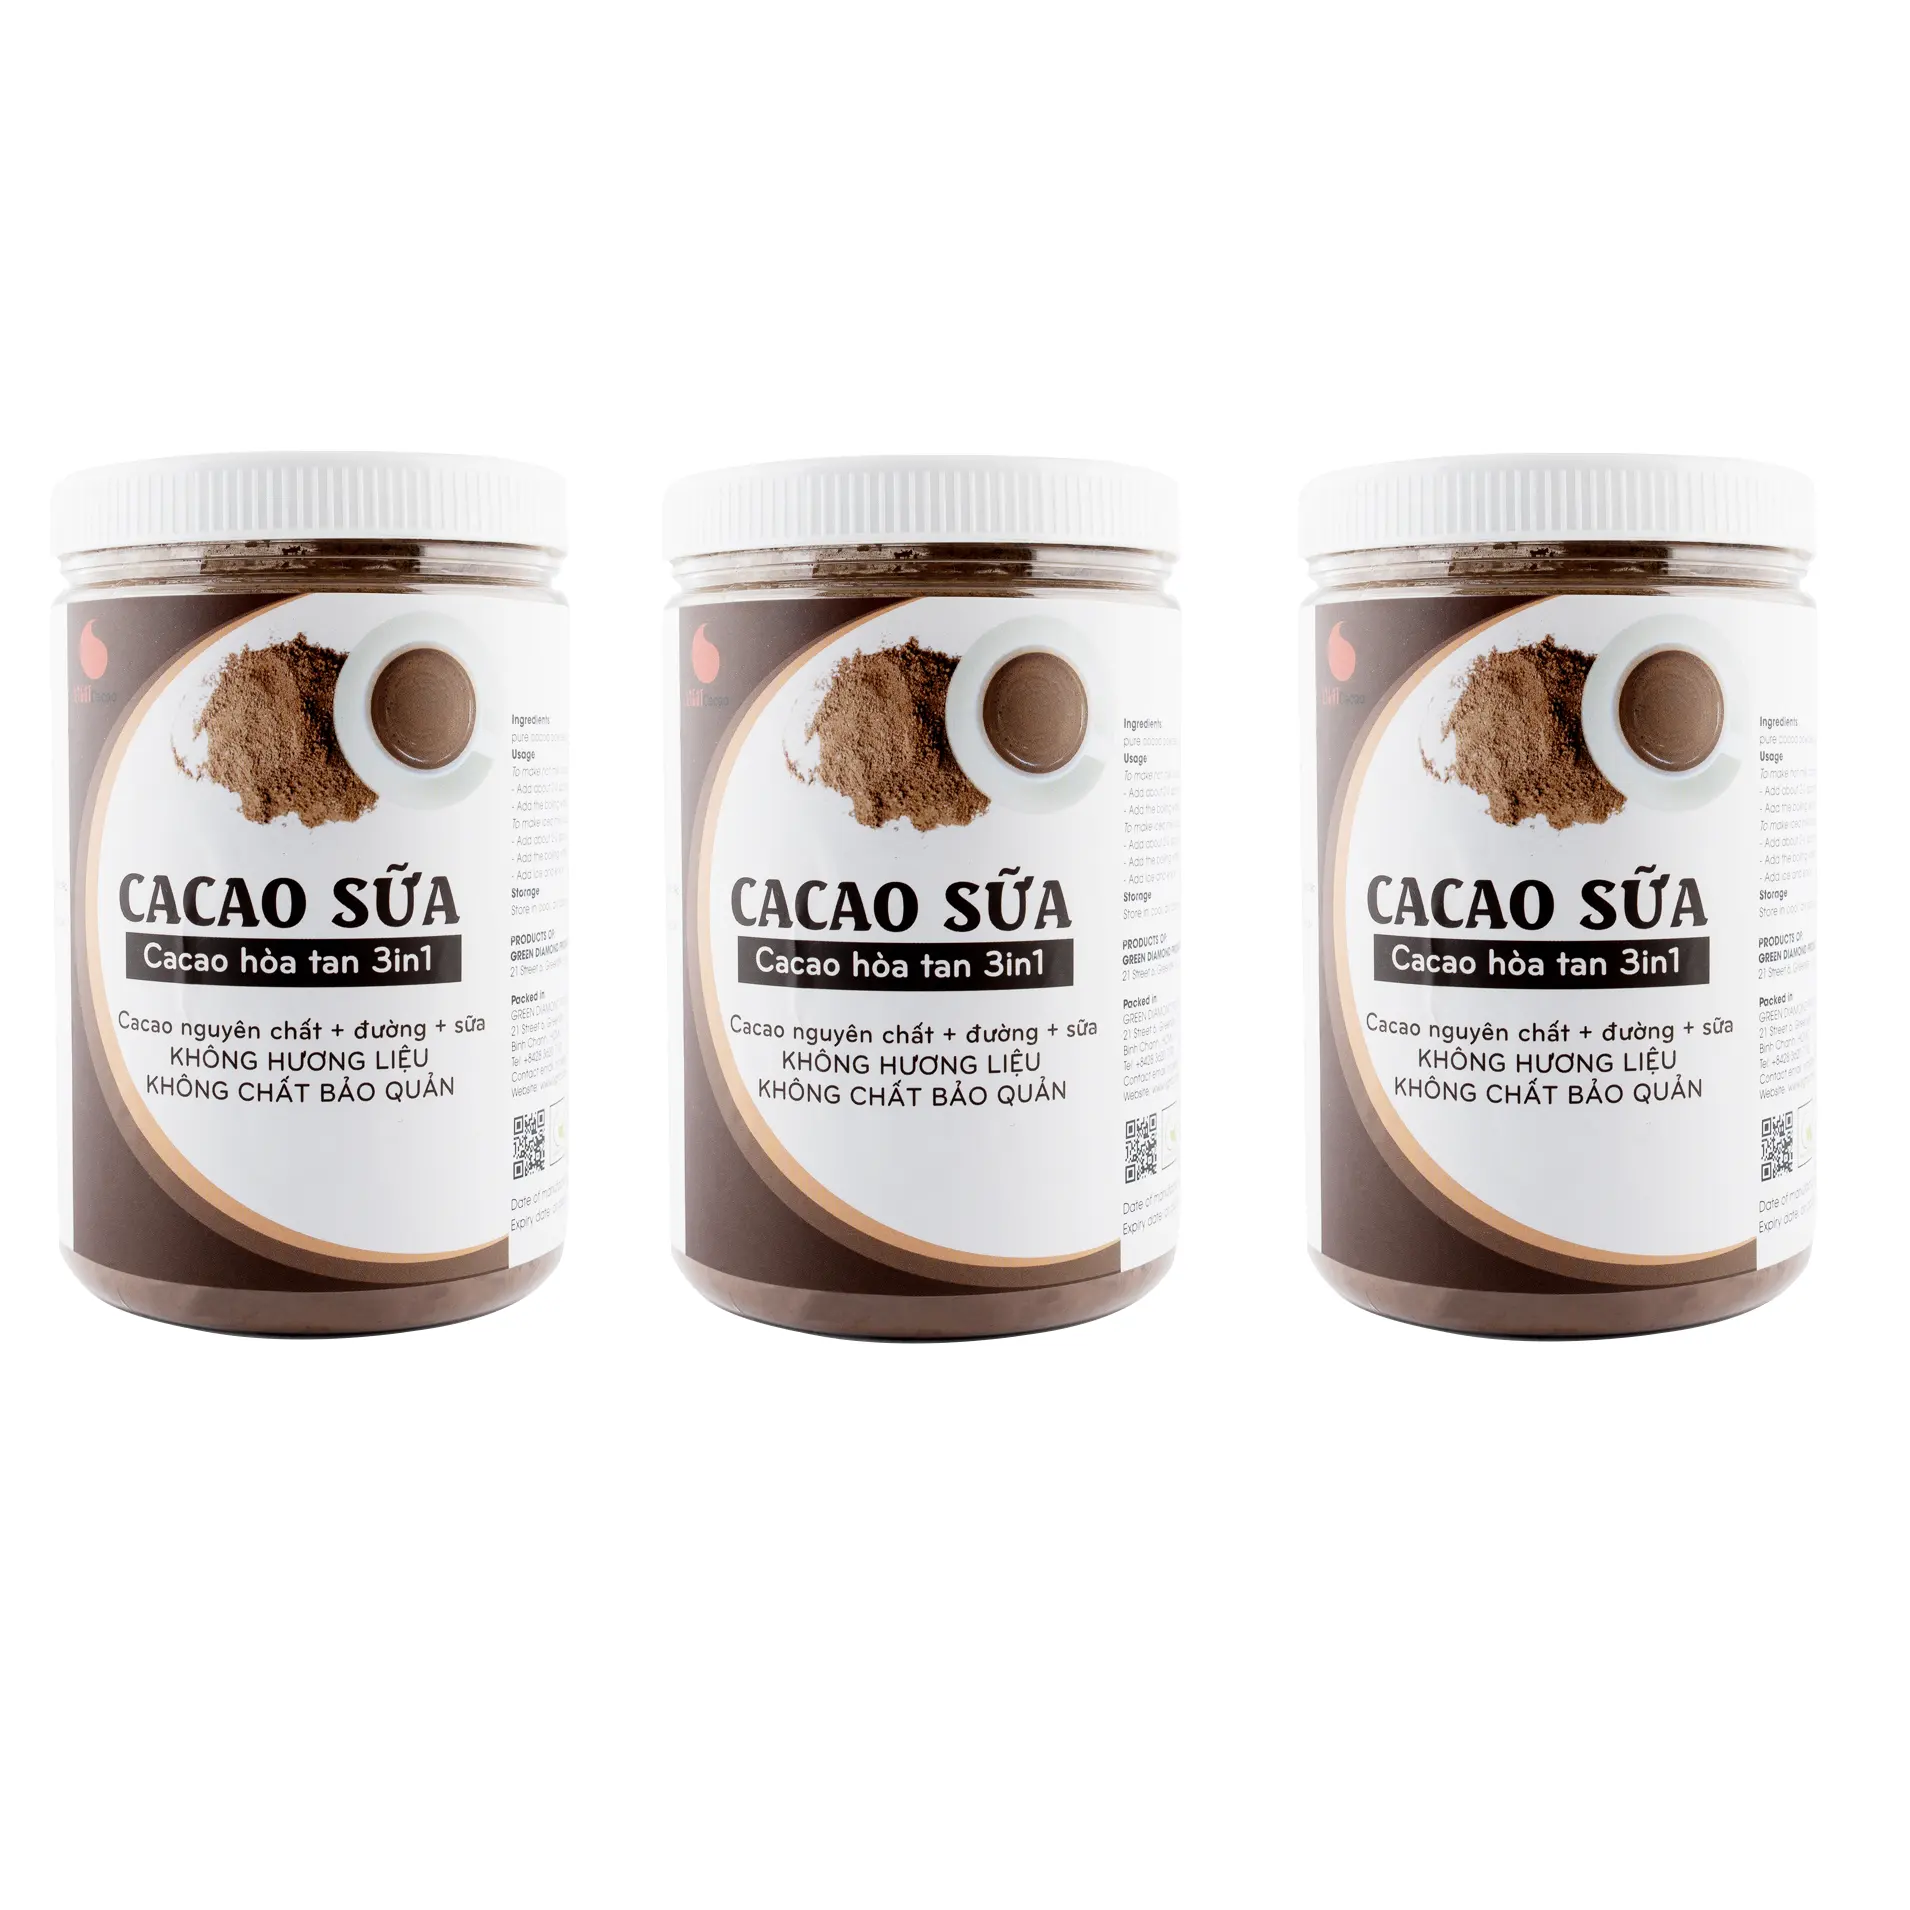 Best Cocoa 100% Crushed CACAO3IN1Jar 550g Powder Best Taste In Box Packaging From Vietnam